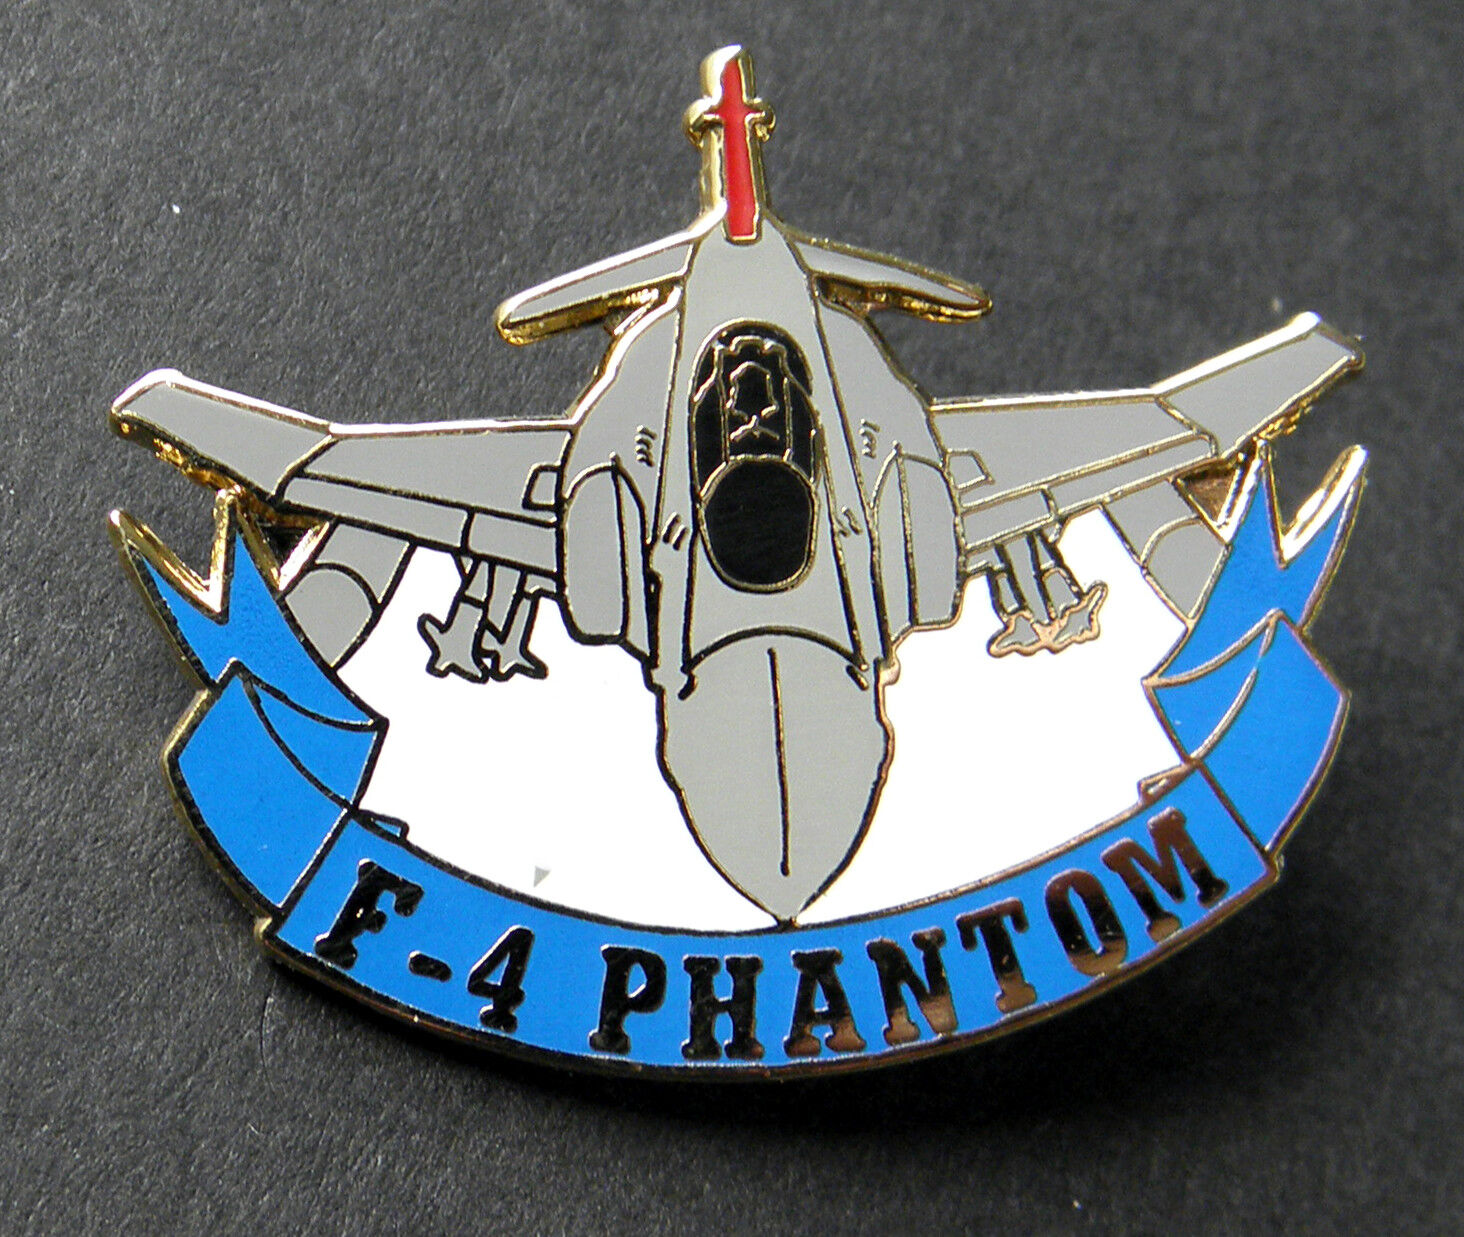 MCDONNELL DOUGLAS F-4 PHANTOM AIRCRAFT CUT-OUT LAPEL PIN 1.25 inches